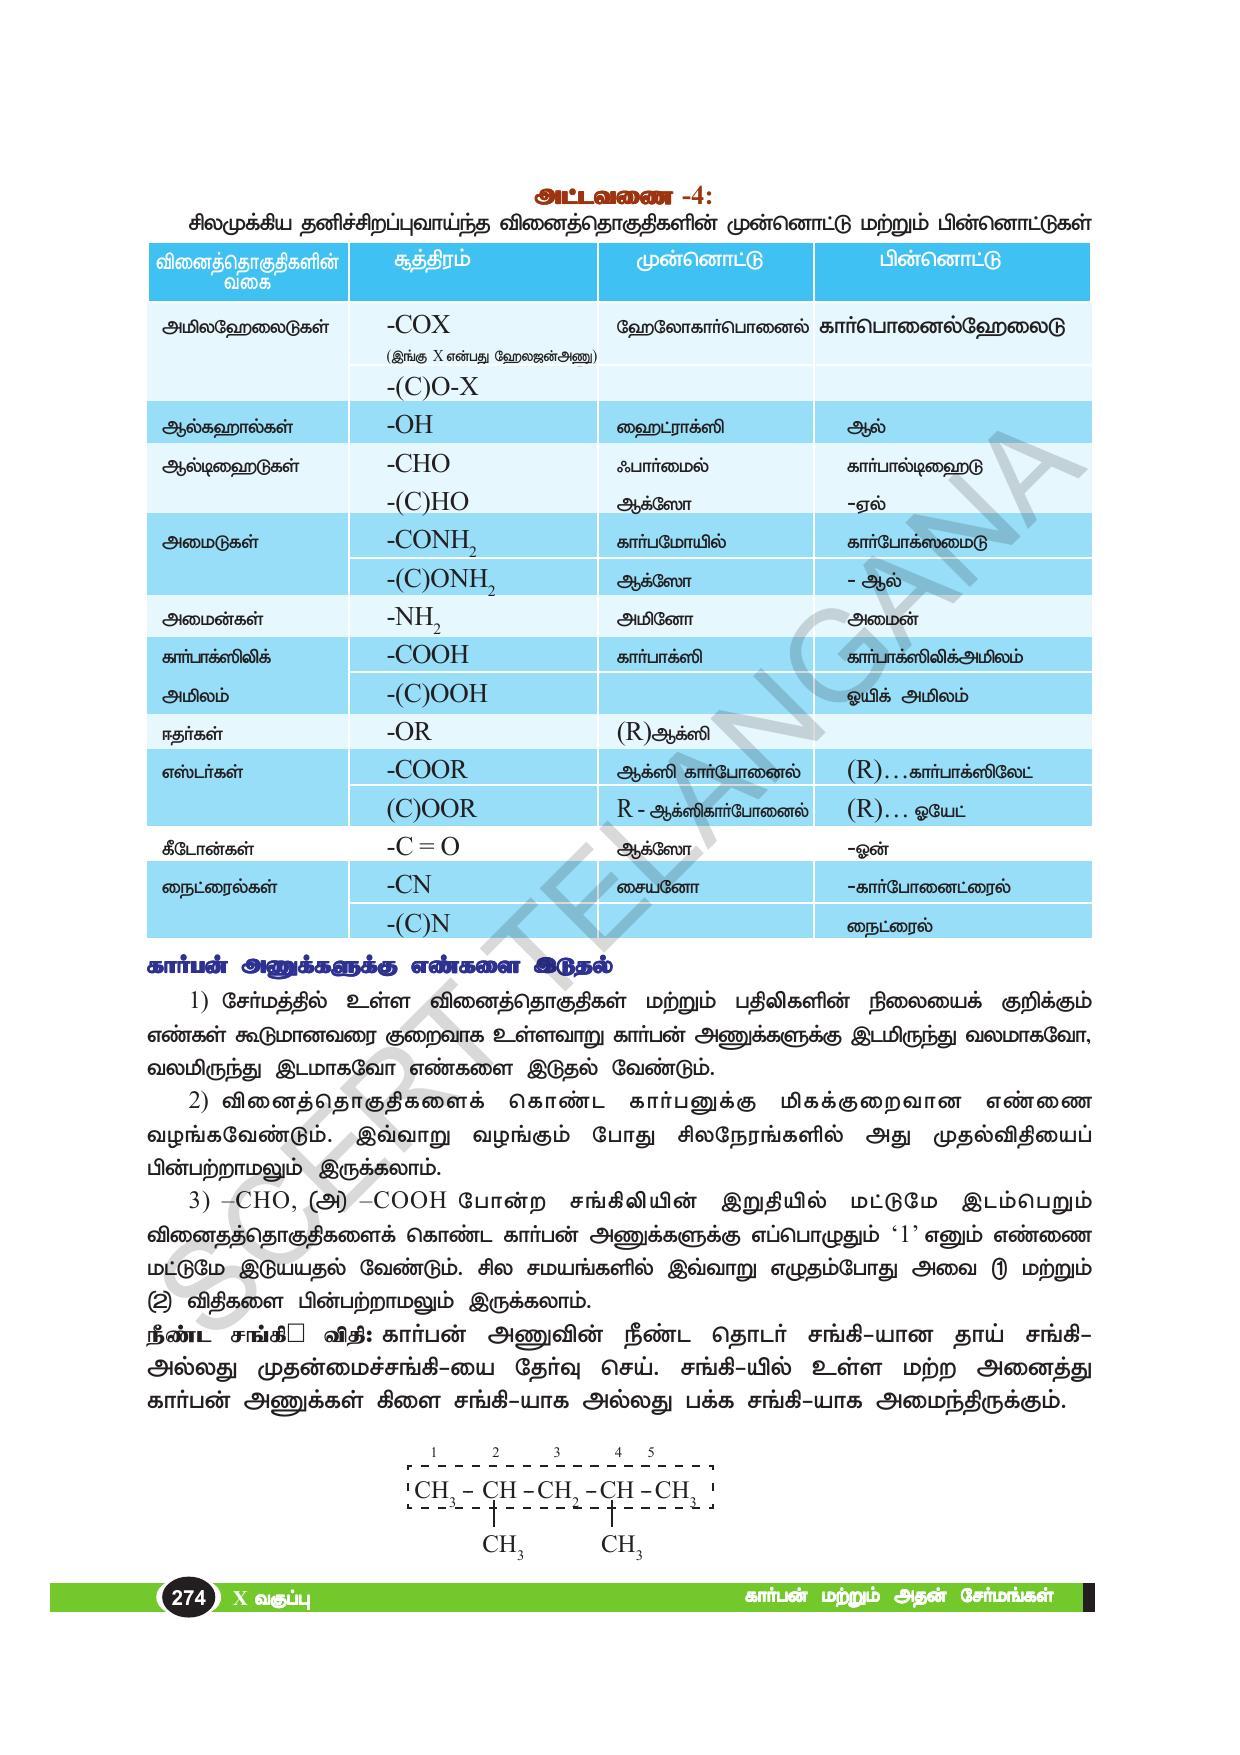 TS SCERT Class 10 Physical Science(Tamil Medium) Text Book - Page 286